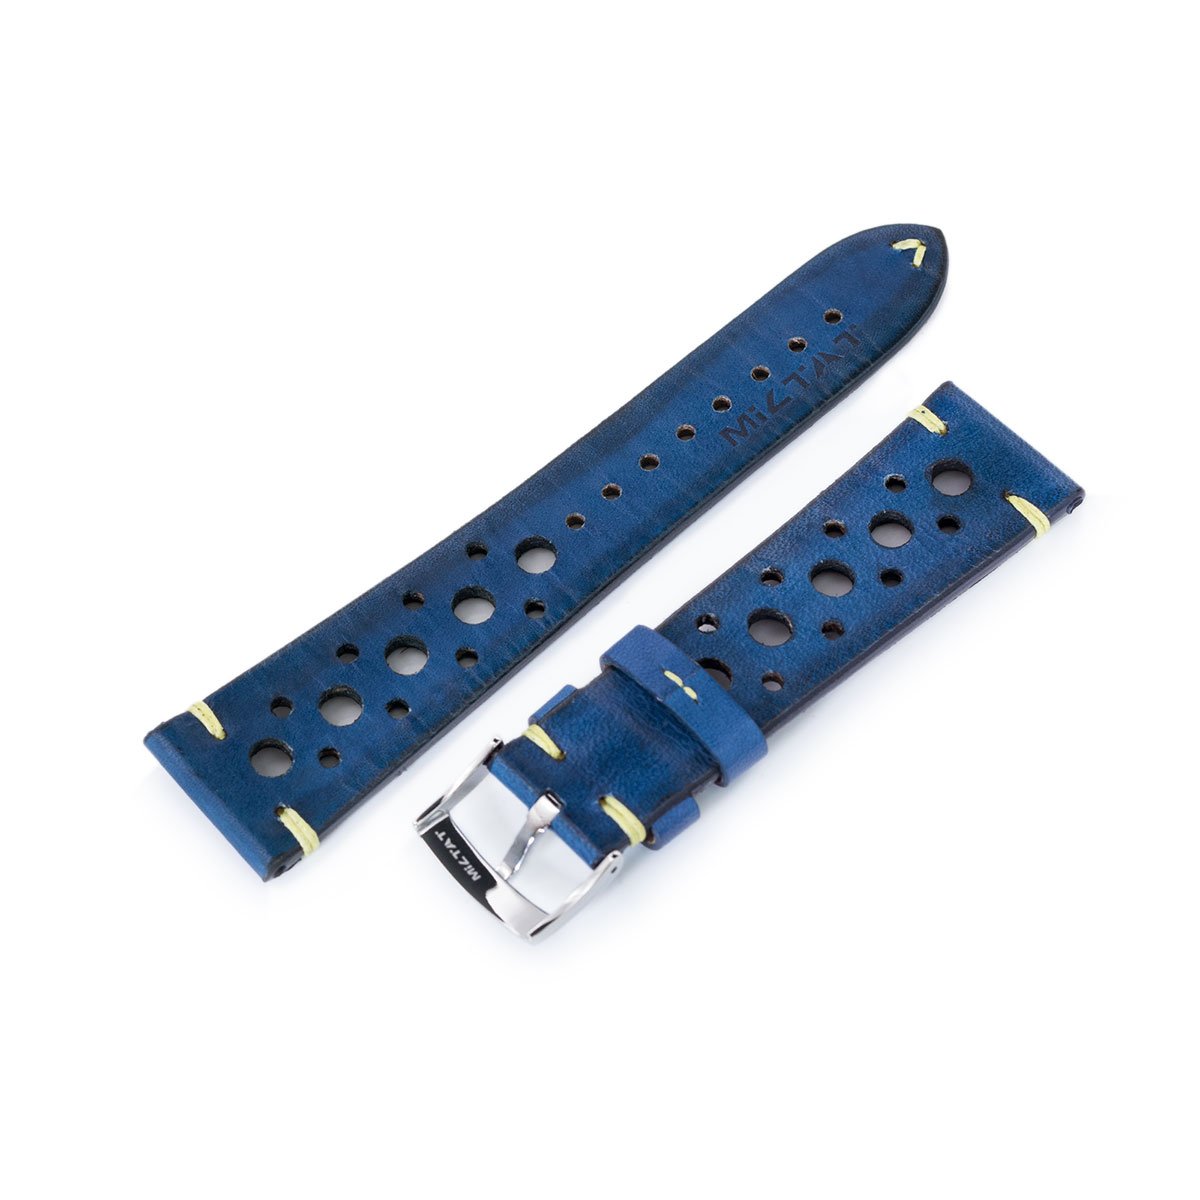 20mm or 22mm MiLTAT Italian Handmade Racer Vintage Jeans Blue Watch Strap Yellow Stitching Strapcode Watch Bands